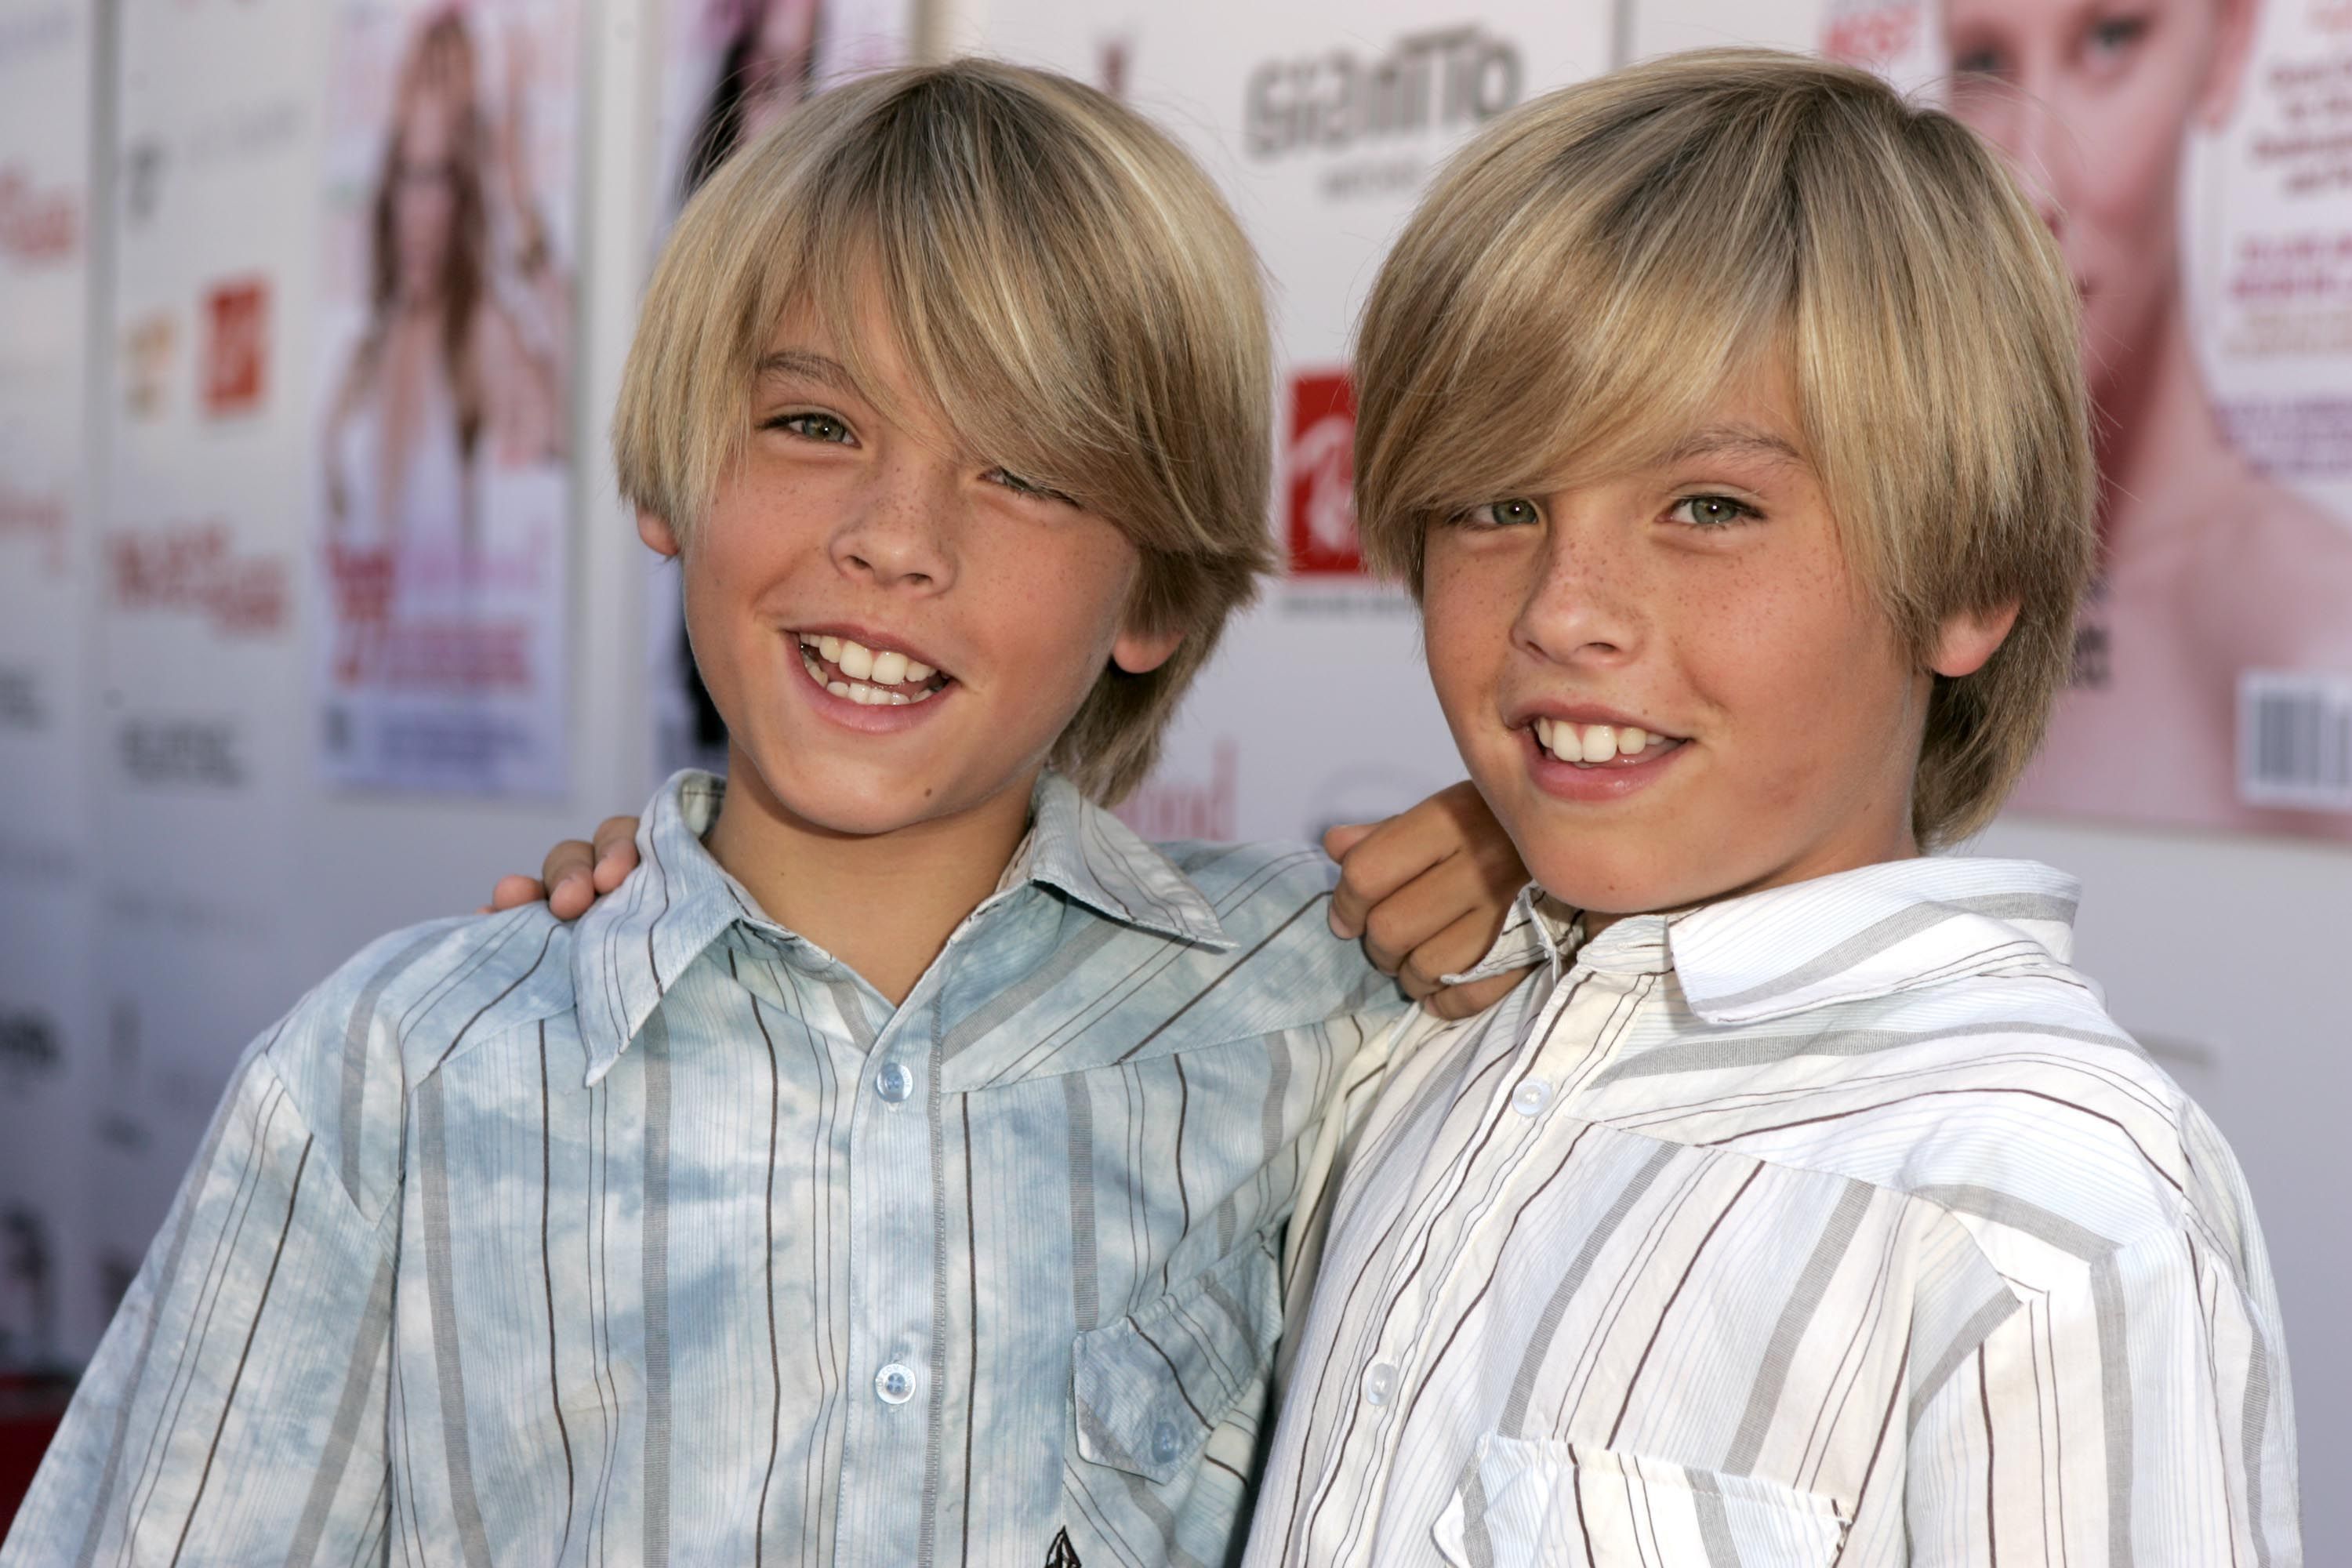 Dylan and Cole in Careers Photos Sprouse: Their